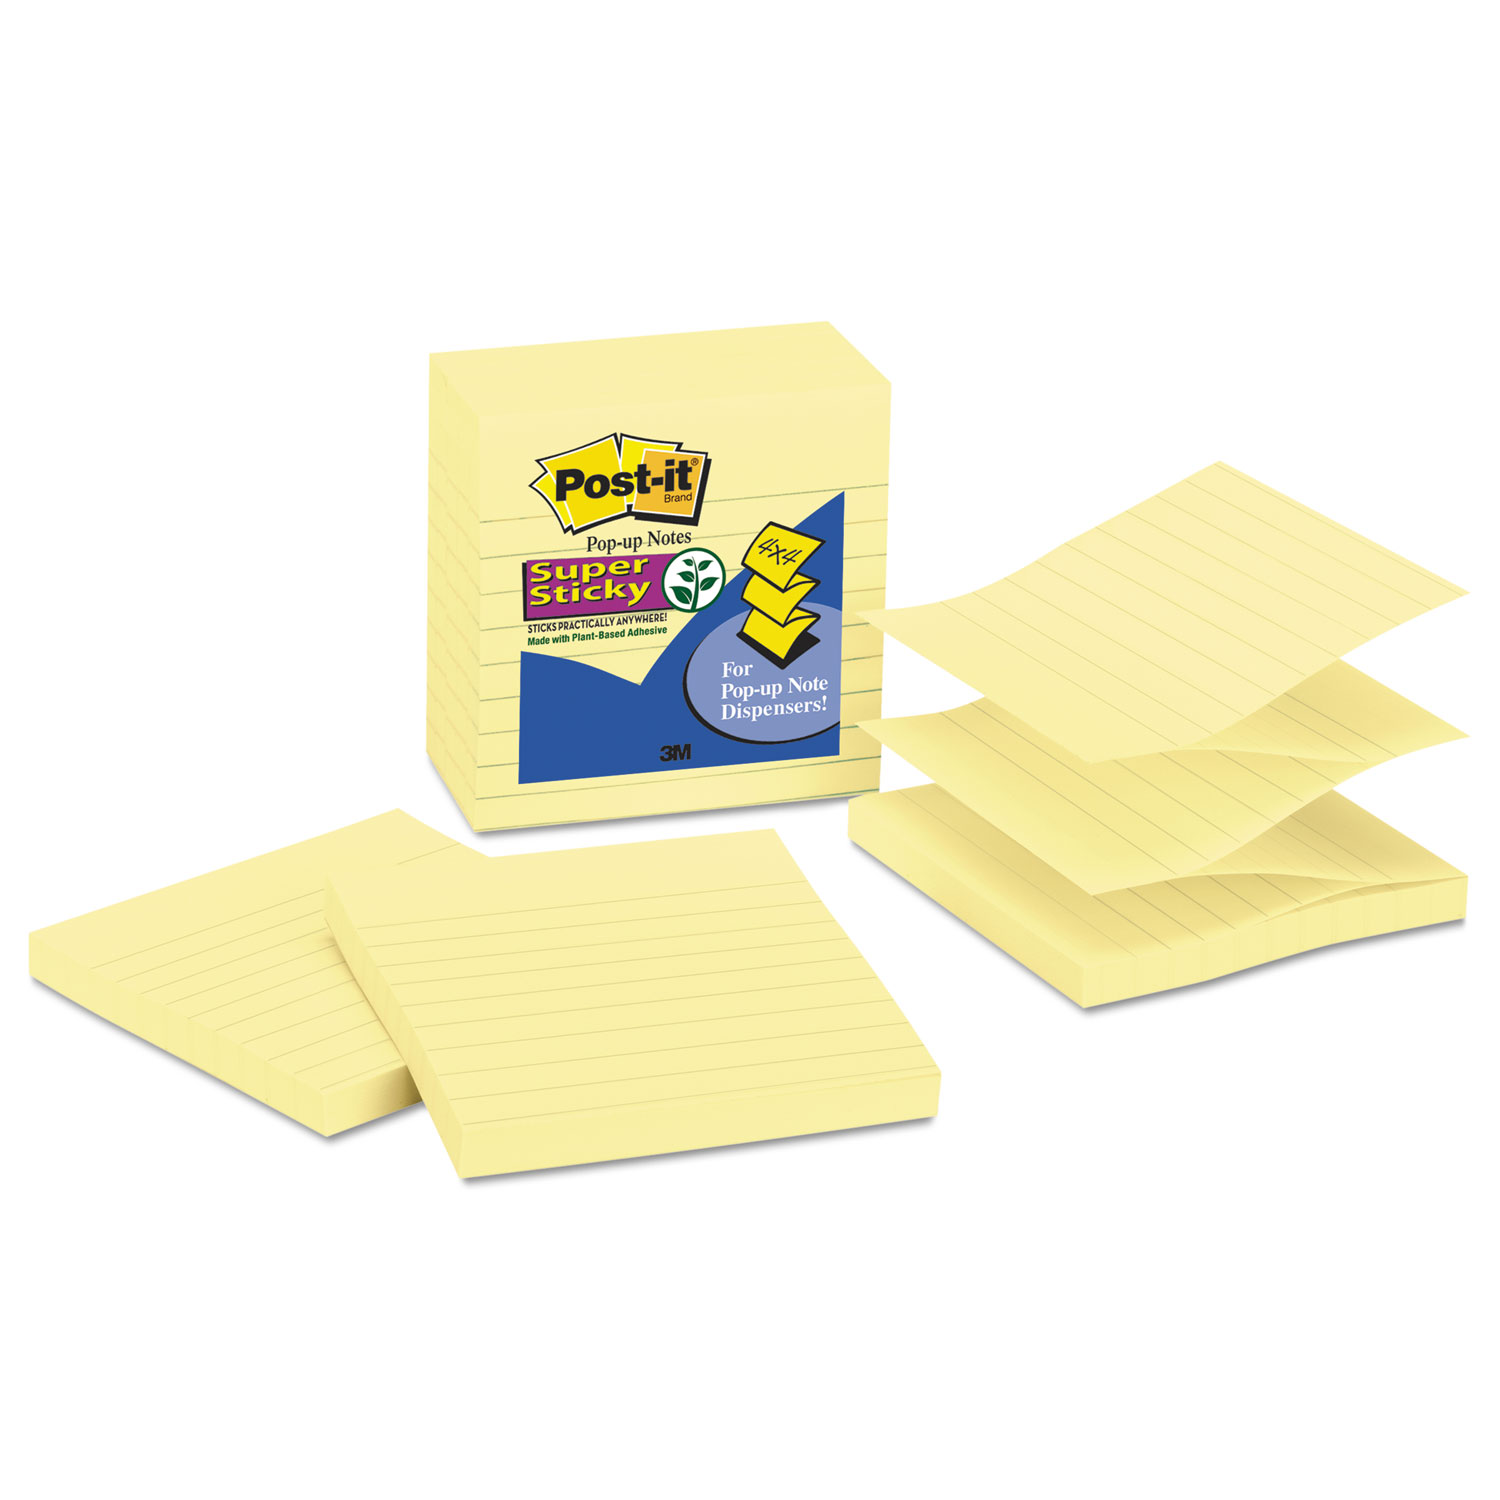  Post-it Pop-up Notes Super Sticky R440-YWSS Pop-up Notes Refill, Lined, 4 x 4, Canary Yellow, 90-Sheet, 5/Pack (MMMR440YWSS) 